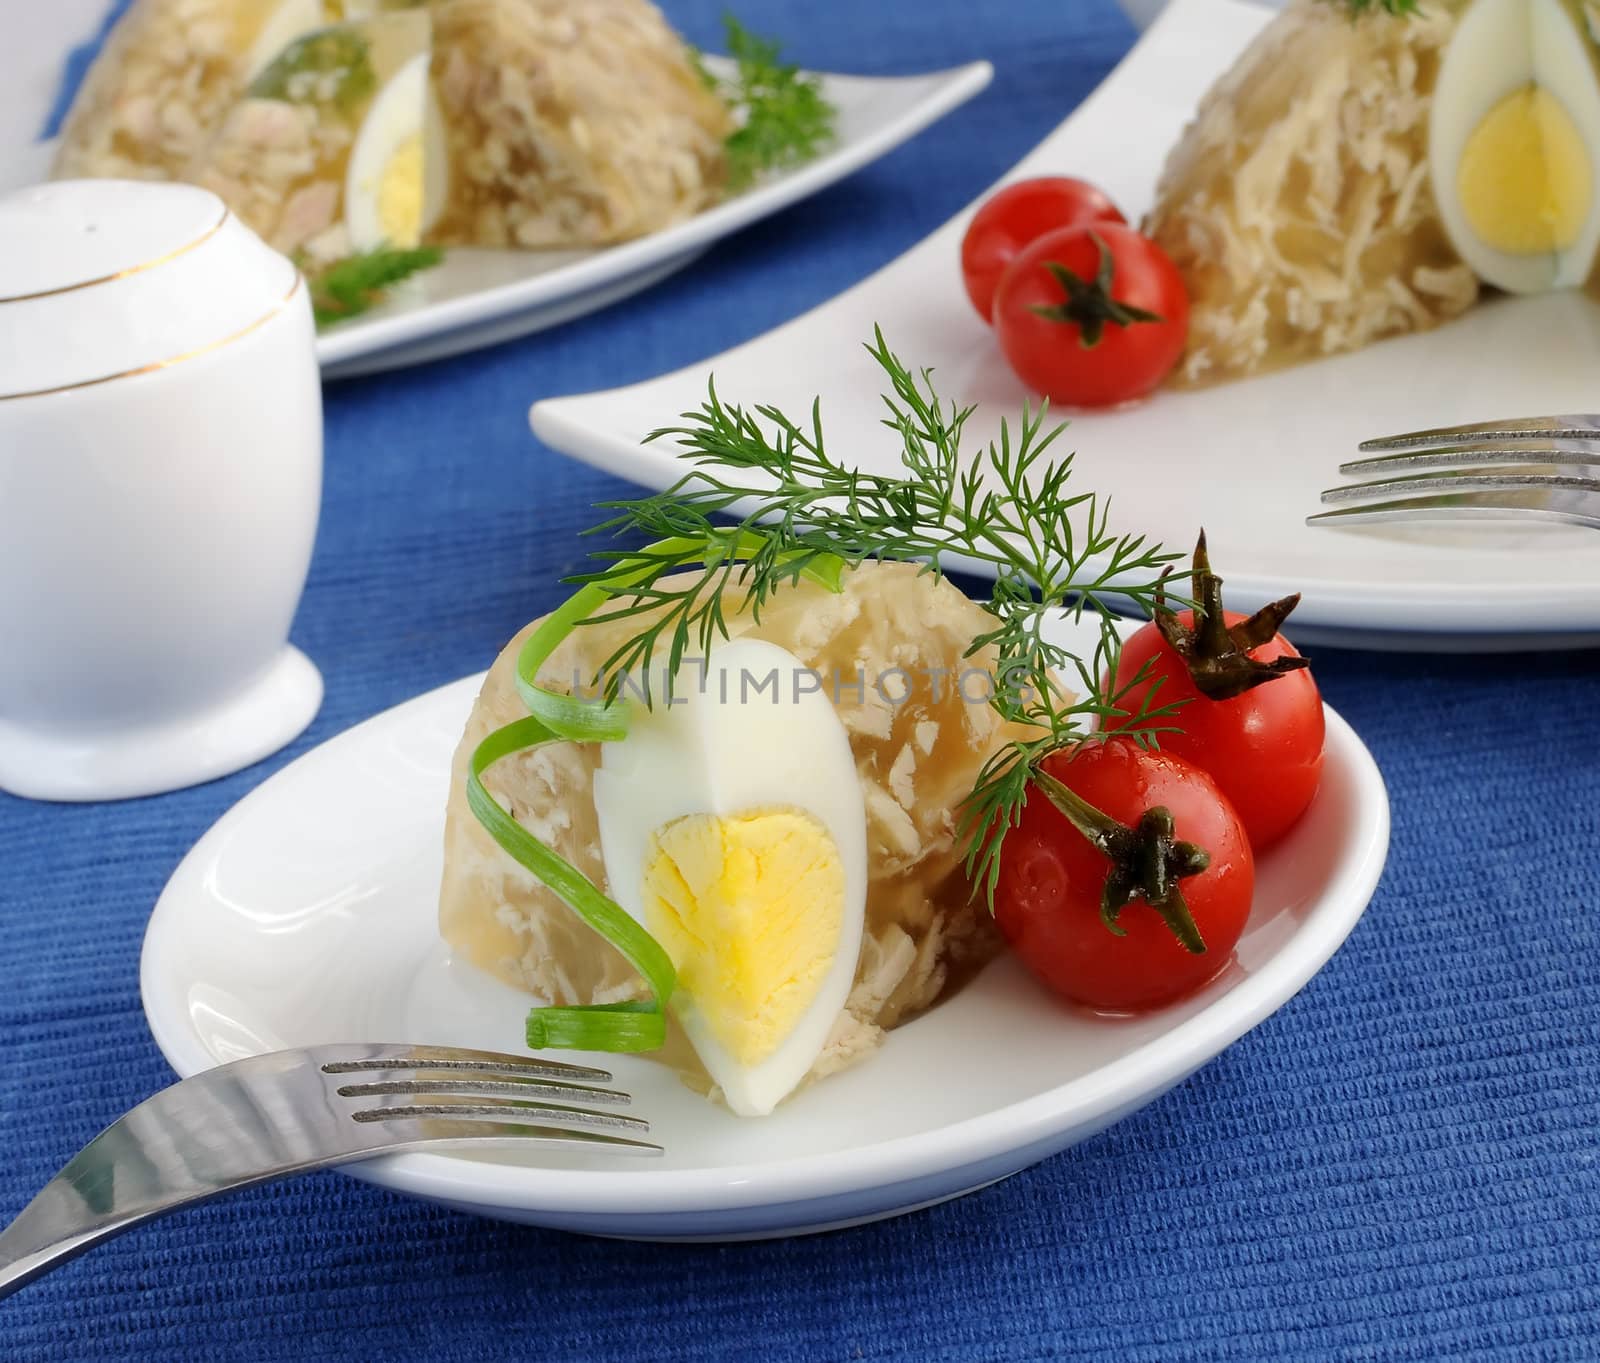  Jellied chicken decorated with egg and dill